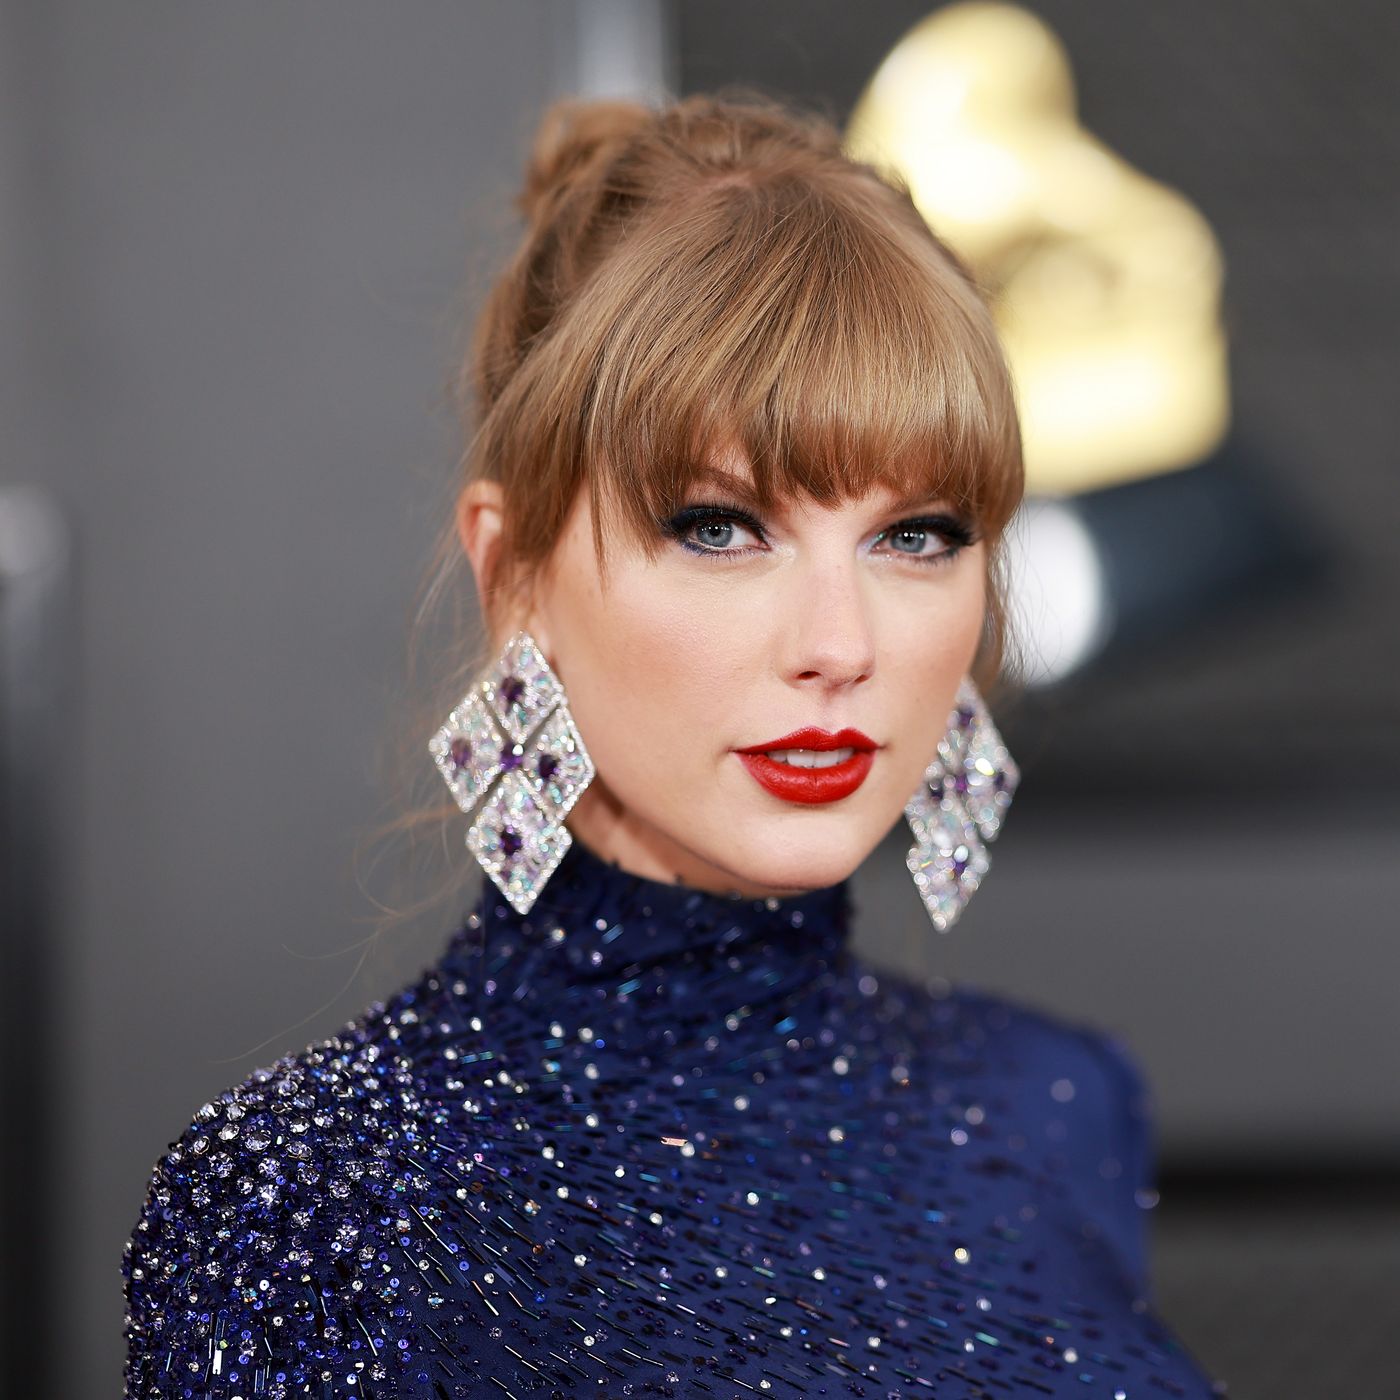 Taylor Swift drops 4 previously unreleased songs - Good Morning America